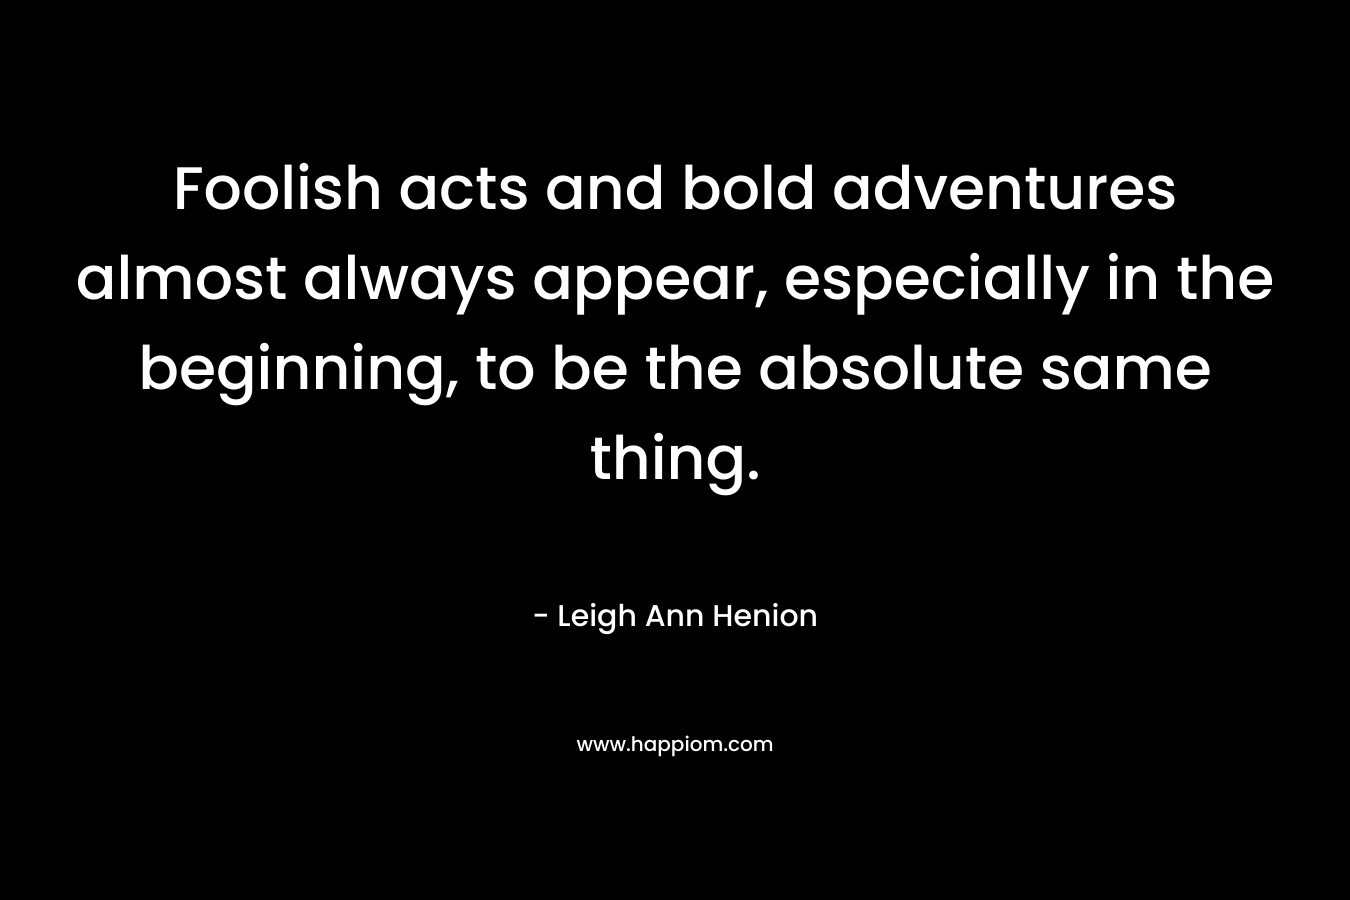 Foolish acts and bold adventures almost always appear, especially in the beginning, to be the absolute same thing. – Leigh Ann Henion